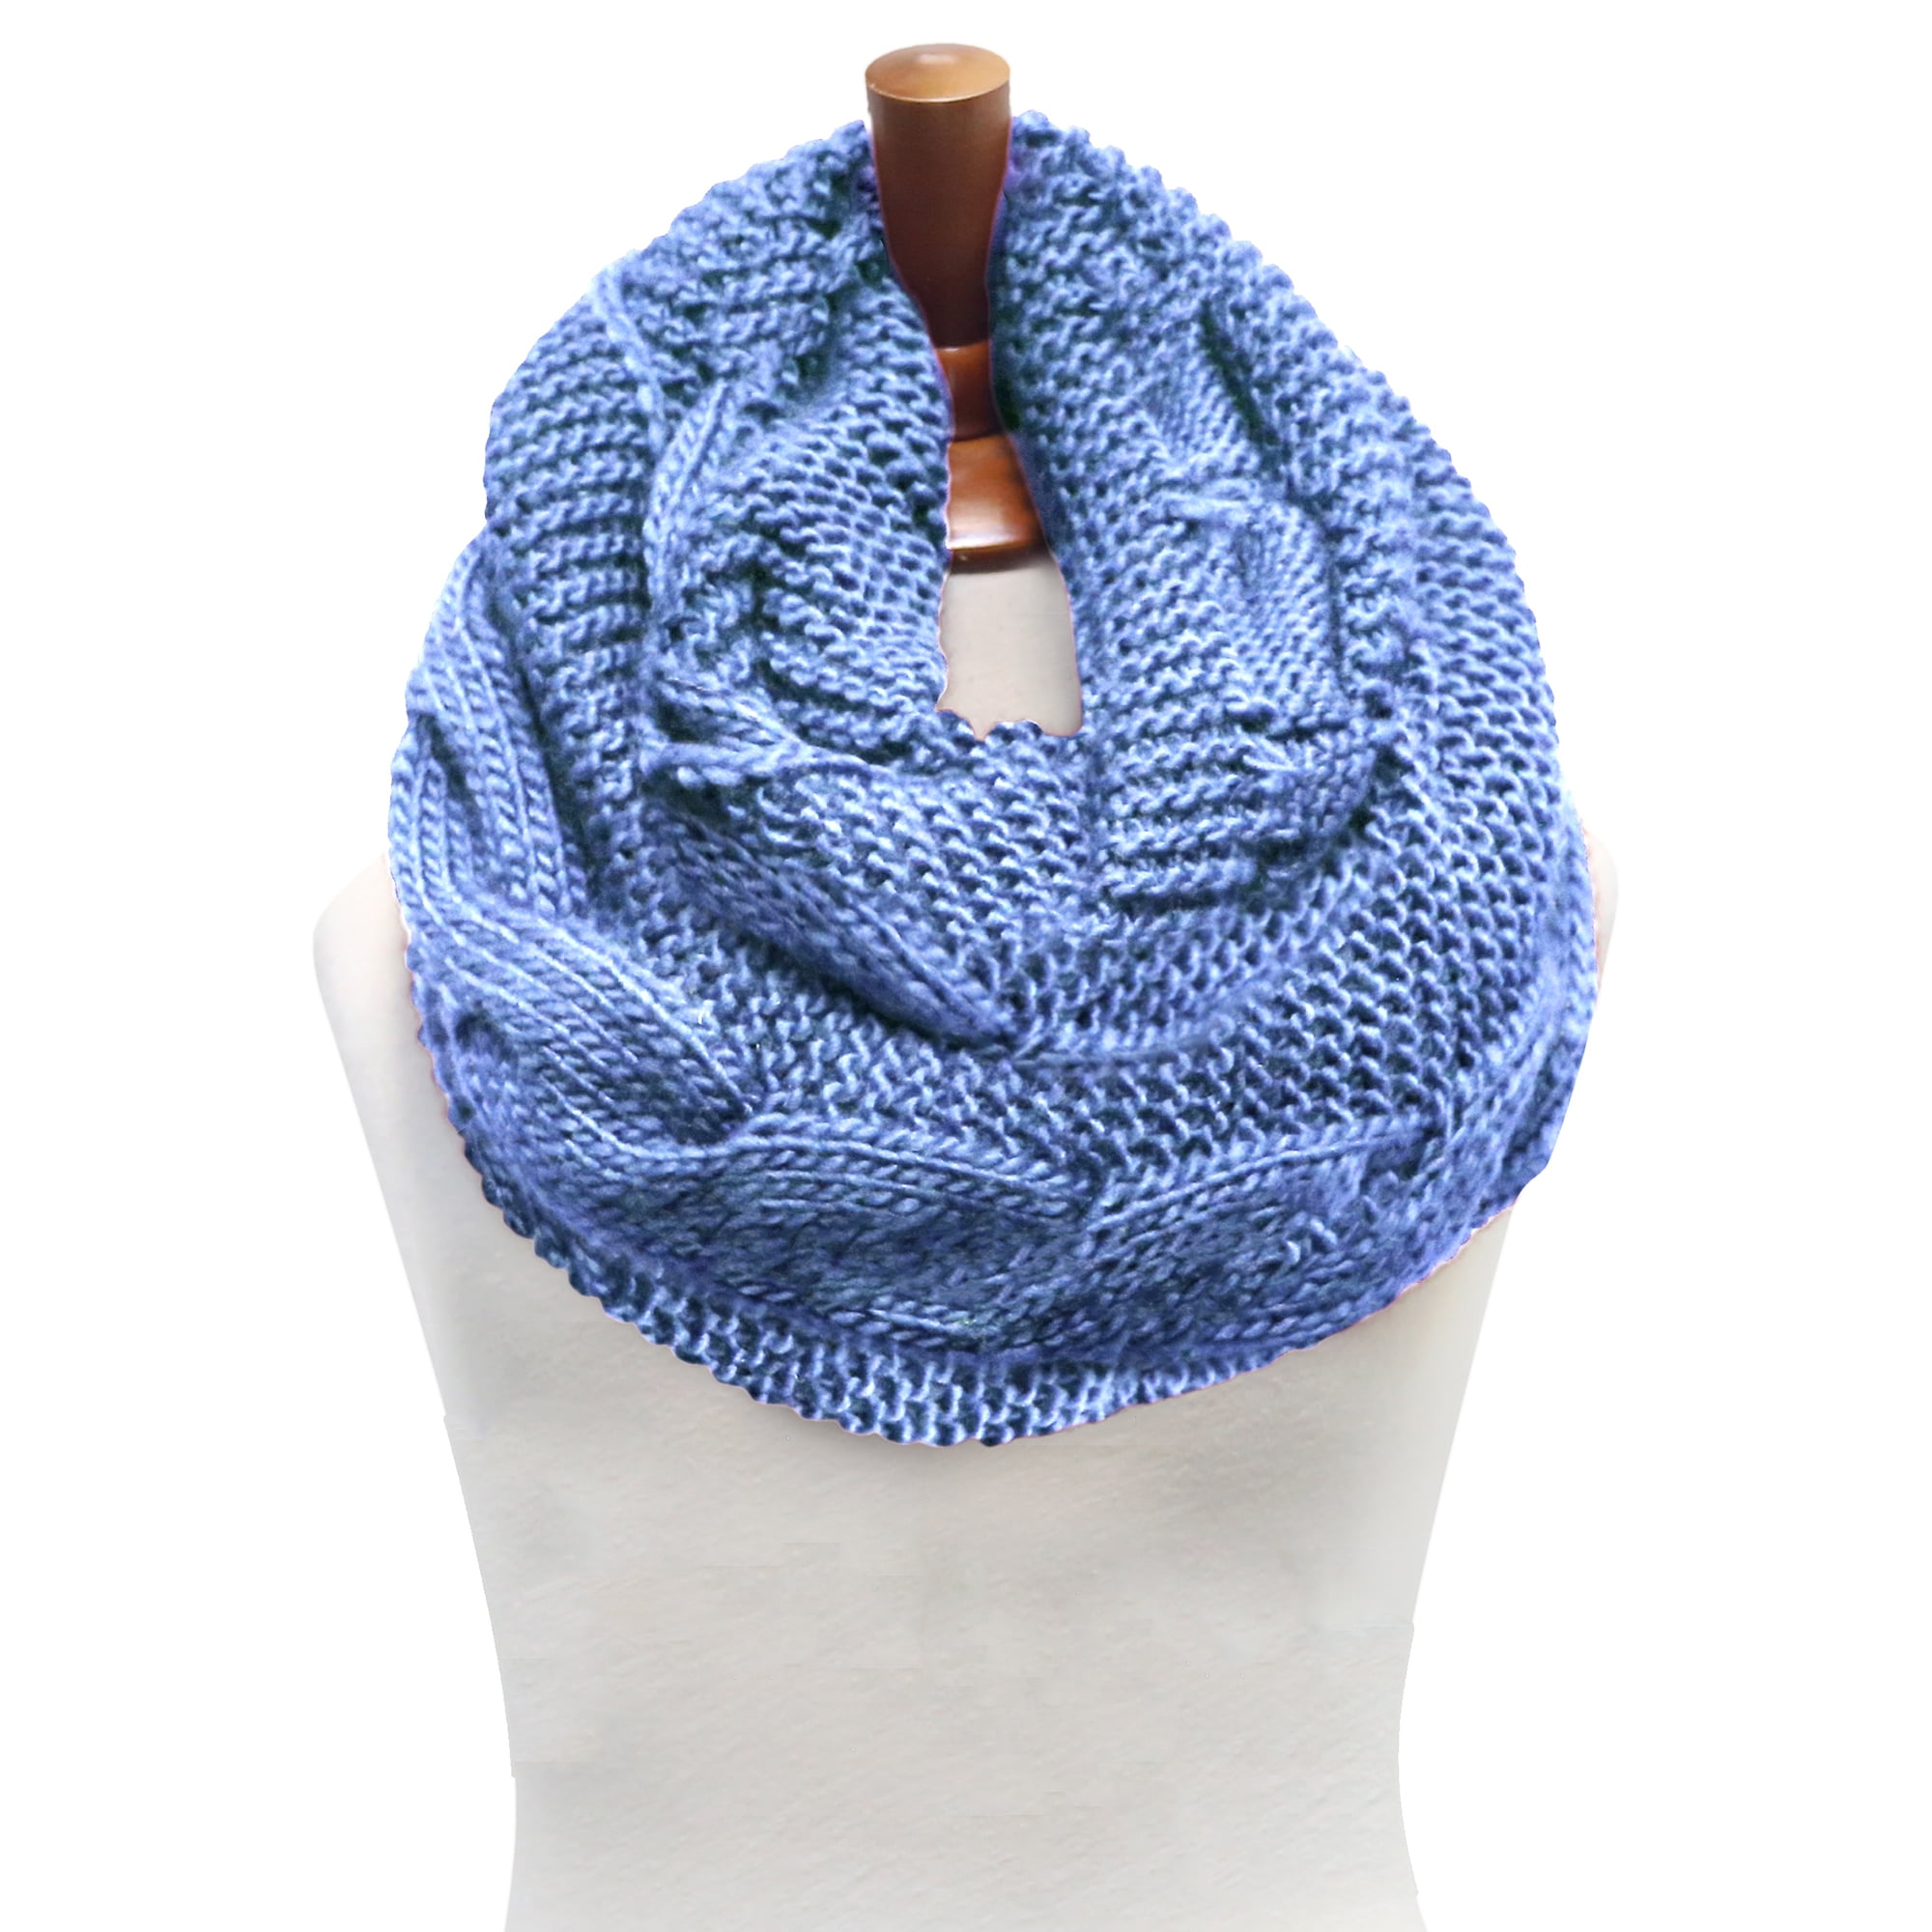 LydiaRener Fabric Blue Scarf. Trendy Cotton Scarf. Neck Warmer. One Loop Scarf. Buckle Scarf. Circle Scarf. Infinity Woman Scarf. Cowl Scarf.